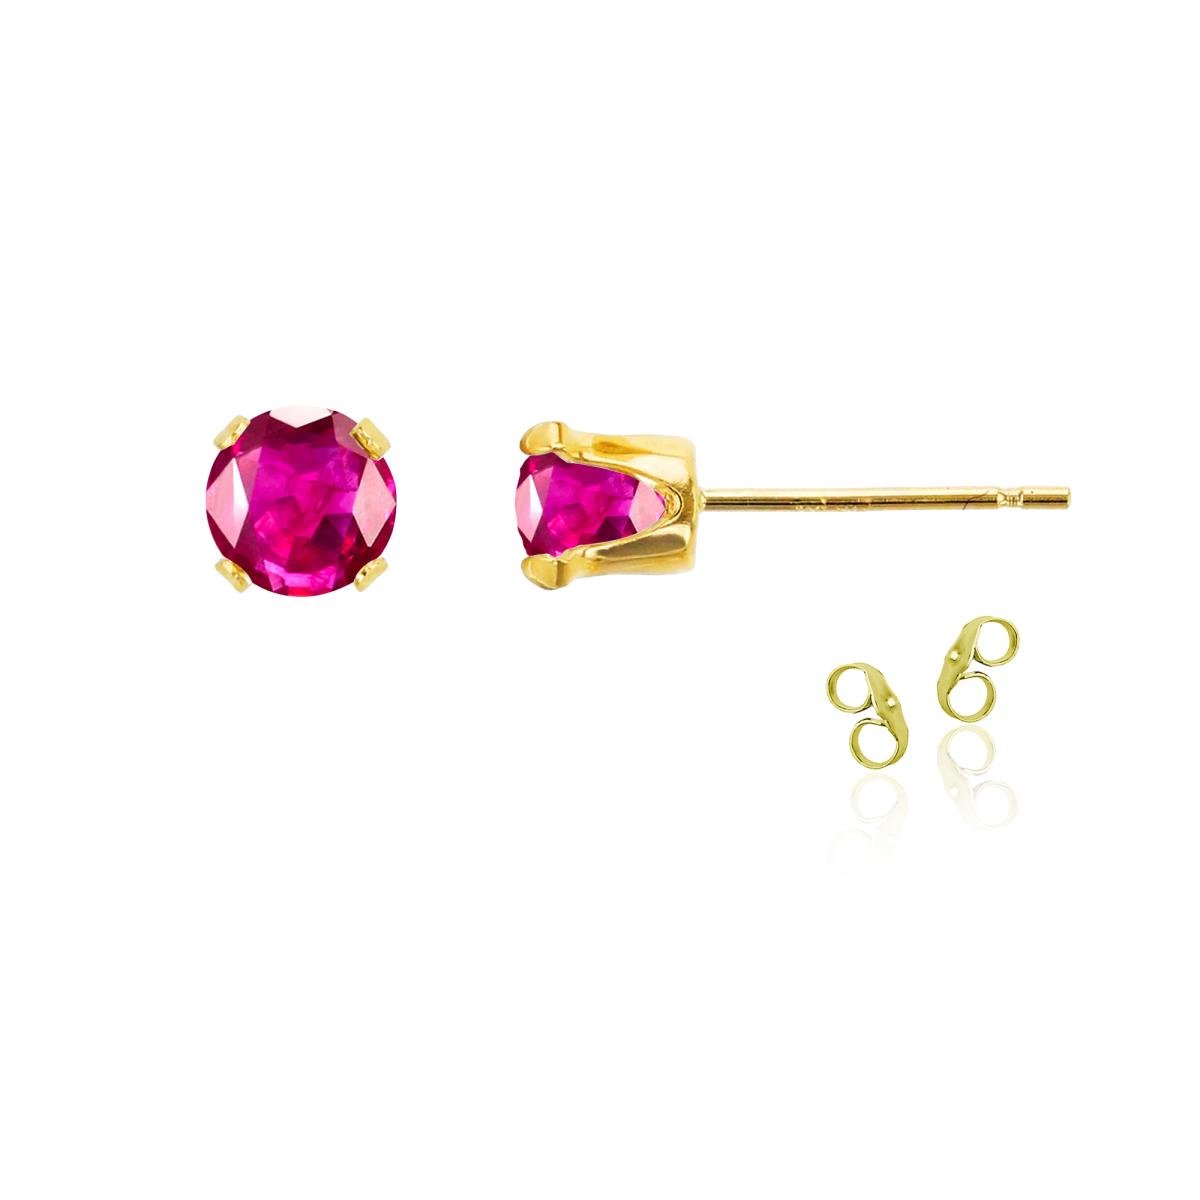 Sterling Silver Yellow 5mm Round Cr Ruby Stud Earring with Clutch